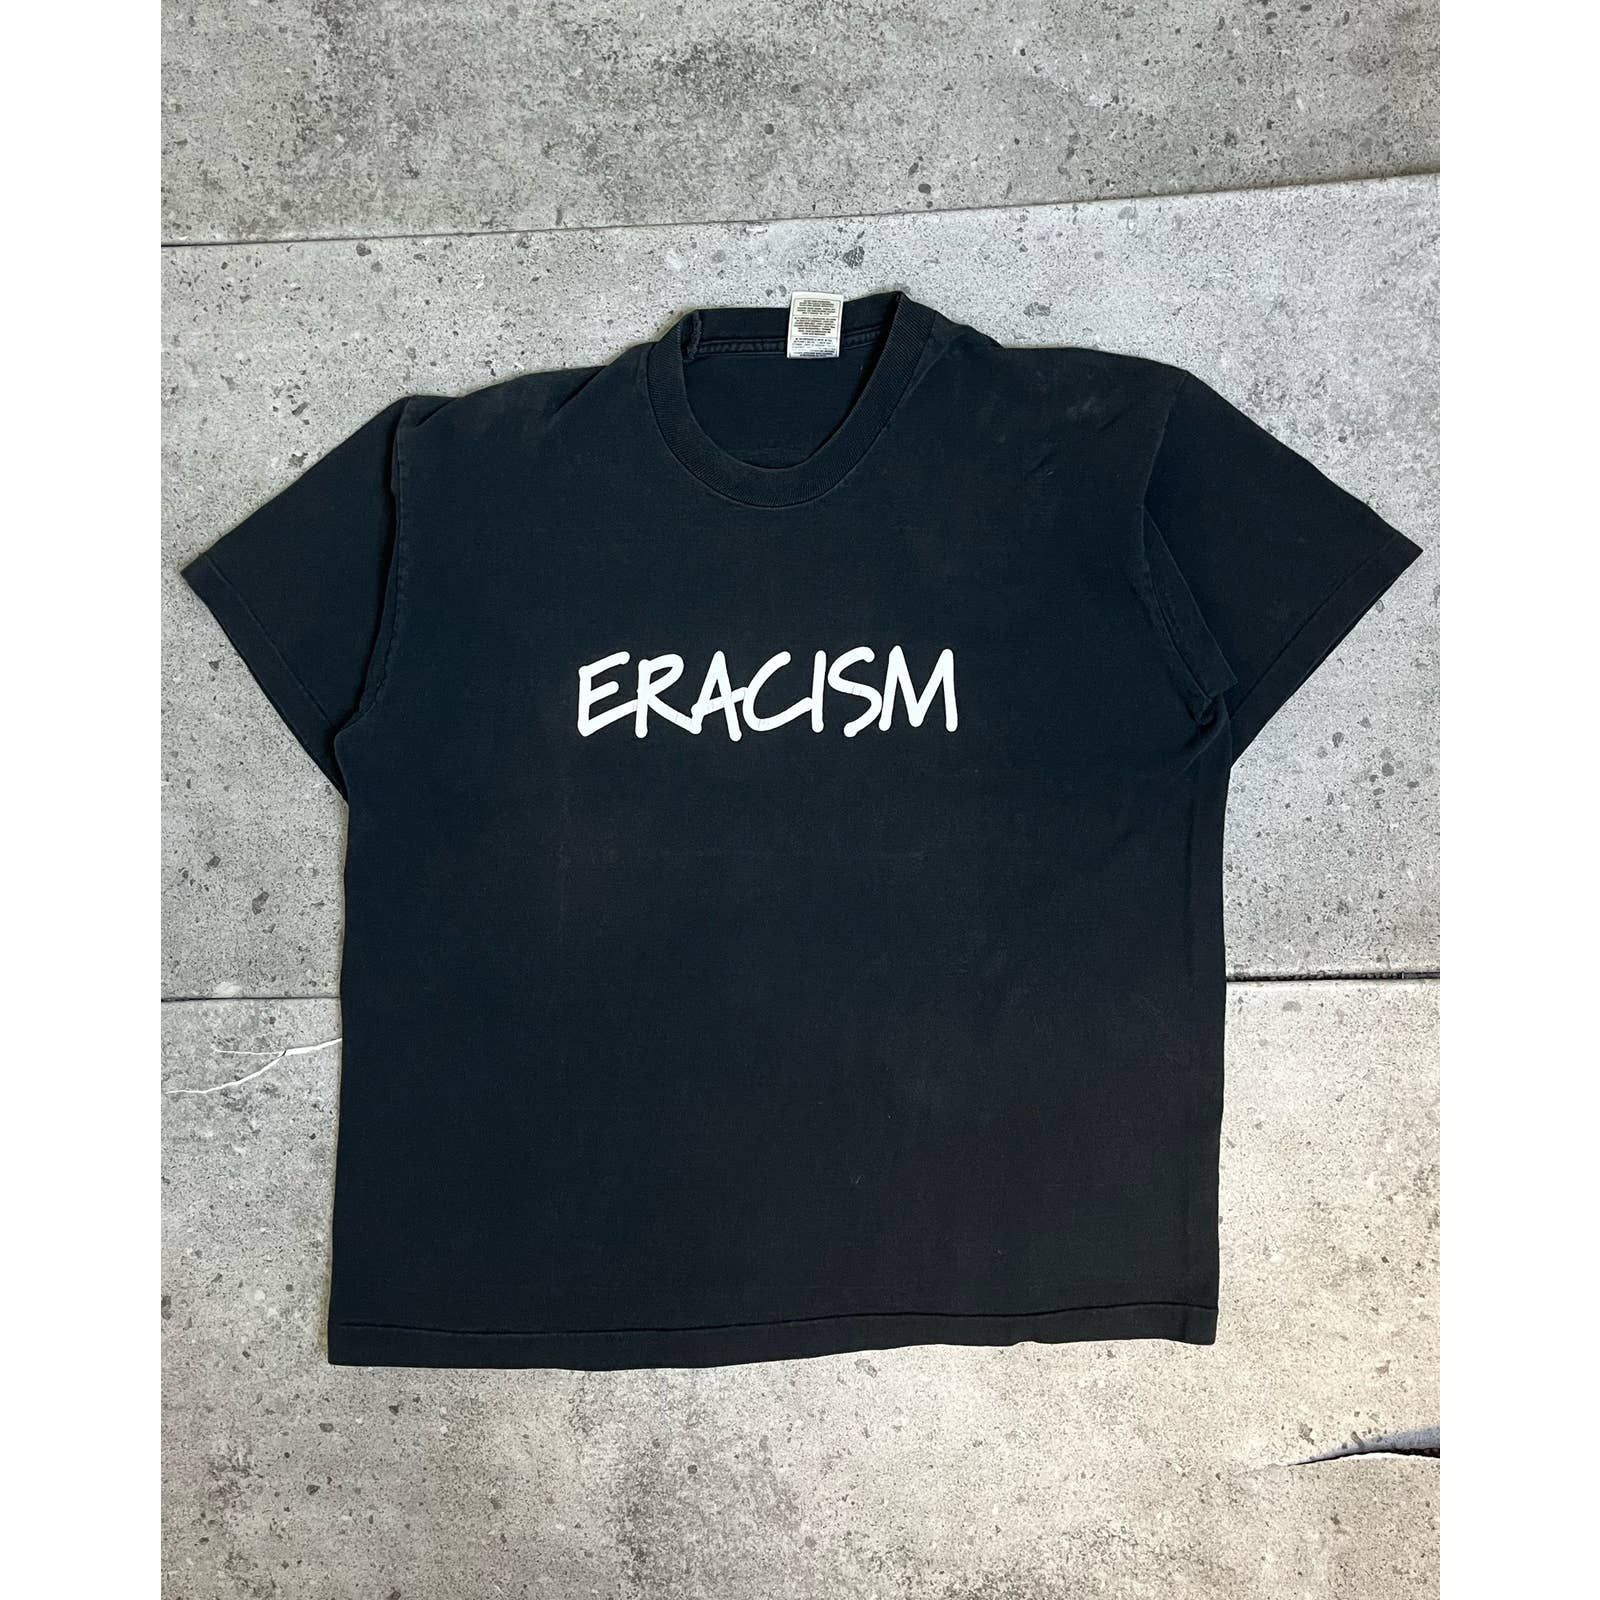 Fruit Of The Loom "Eracism" Tee (XL) - 1990s Size US XL / EU 56 / 4 - 1 Preview